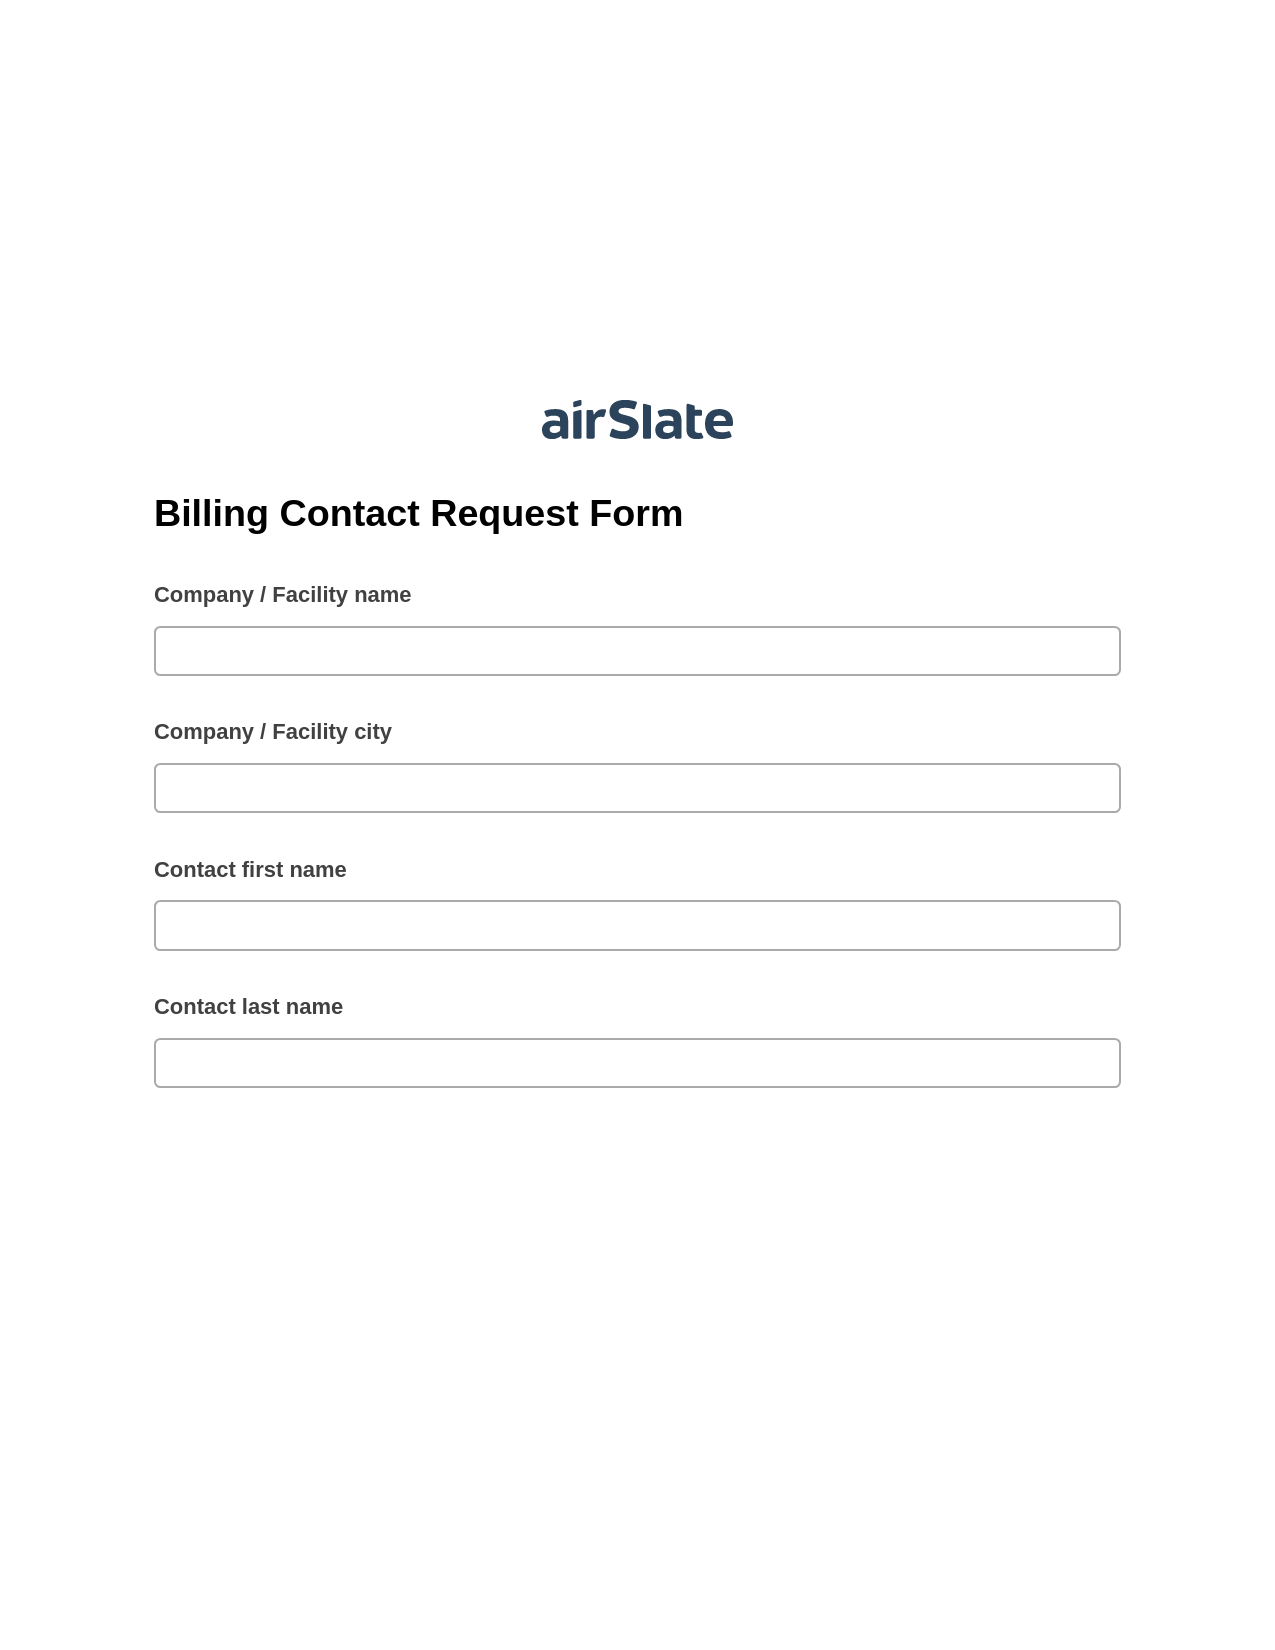 Multirole Billing Contact Request Form Pre-fill Slate from MS Dynamics 365 Records Bot, Send a Slate to MS Dynamics 365 Contact Bot, Export to Formstack Documents Bot